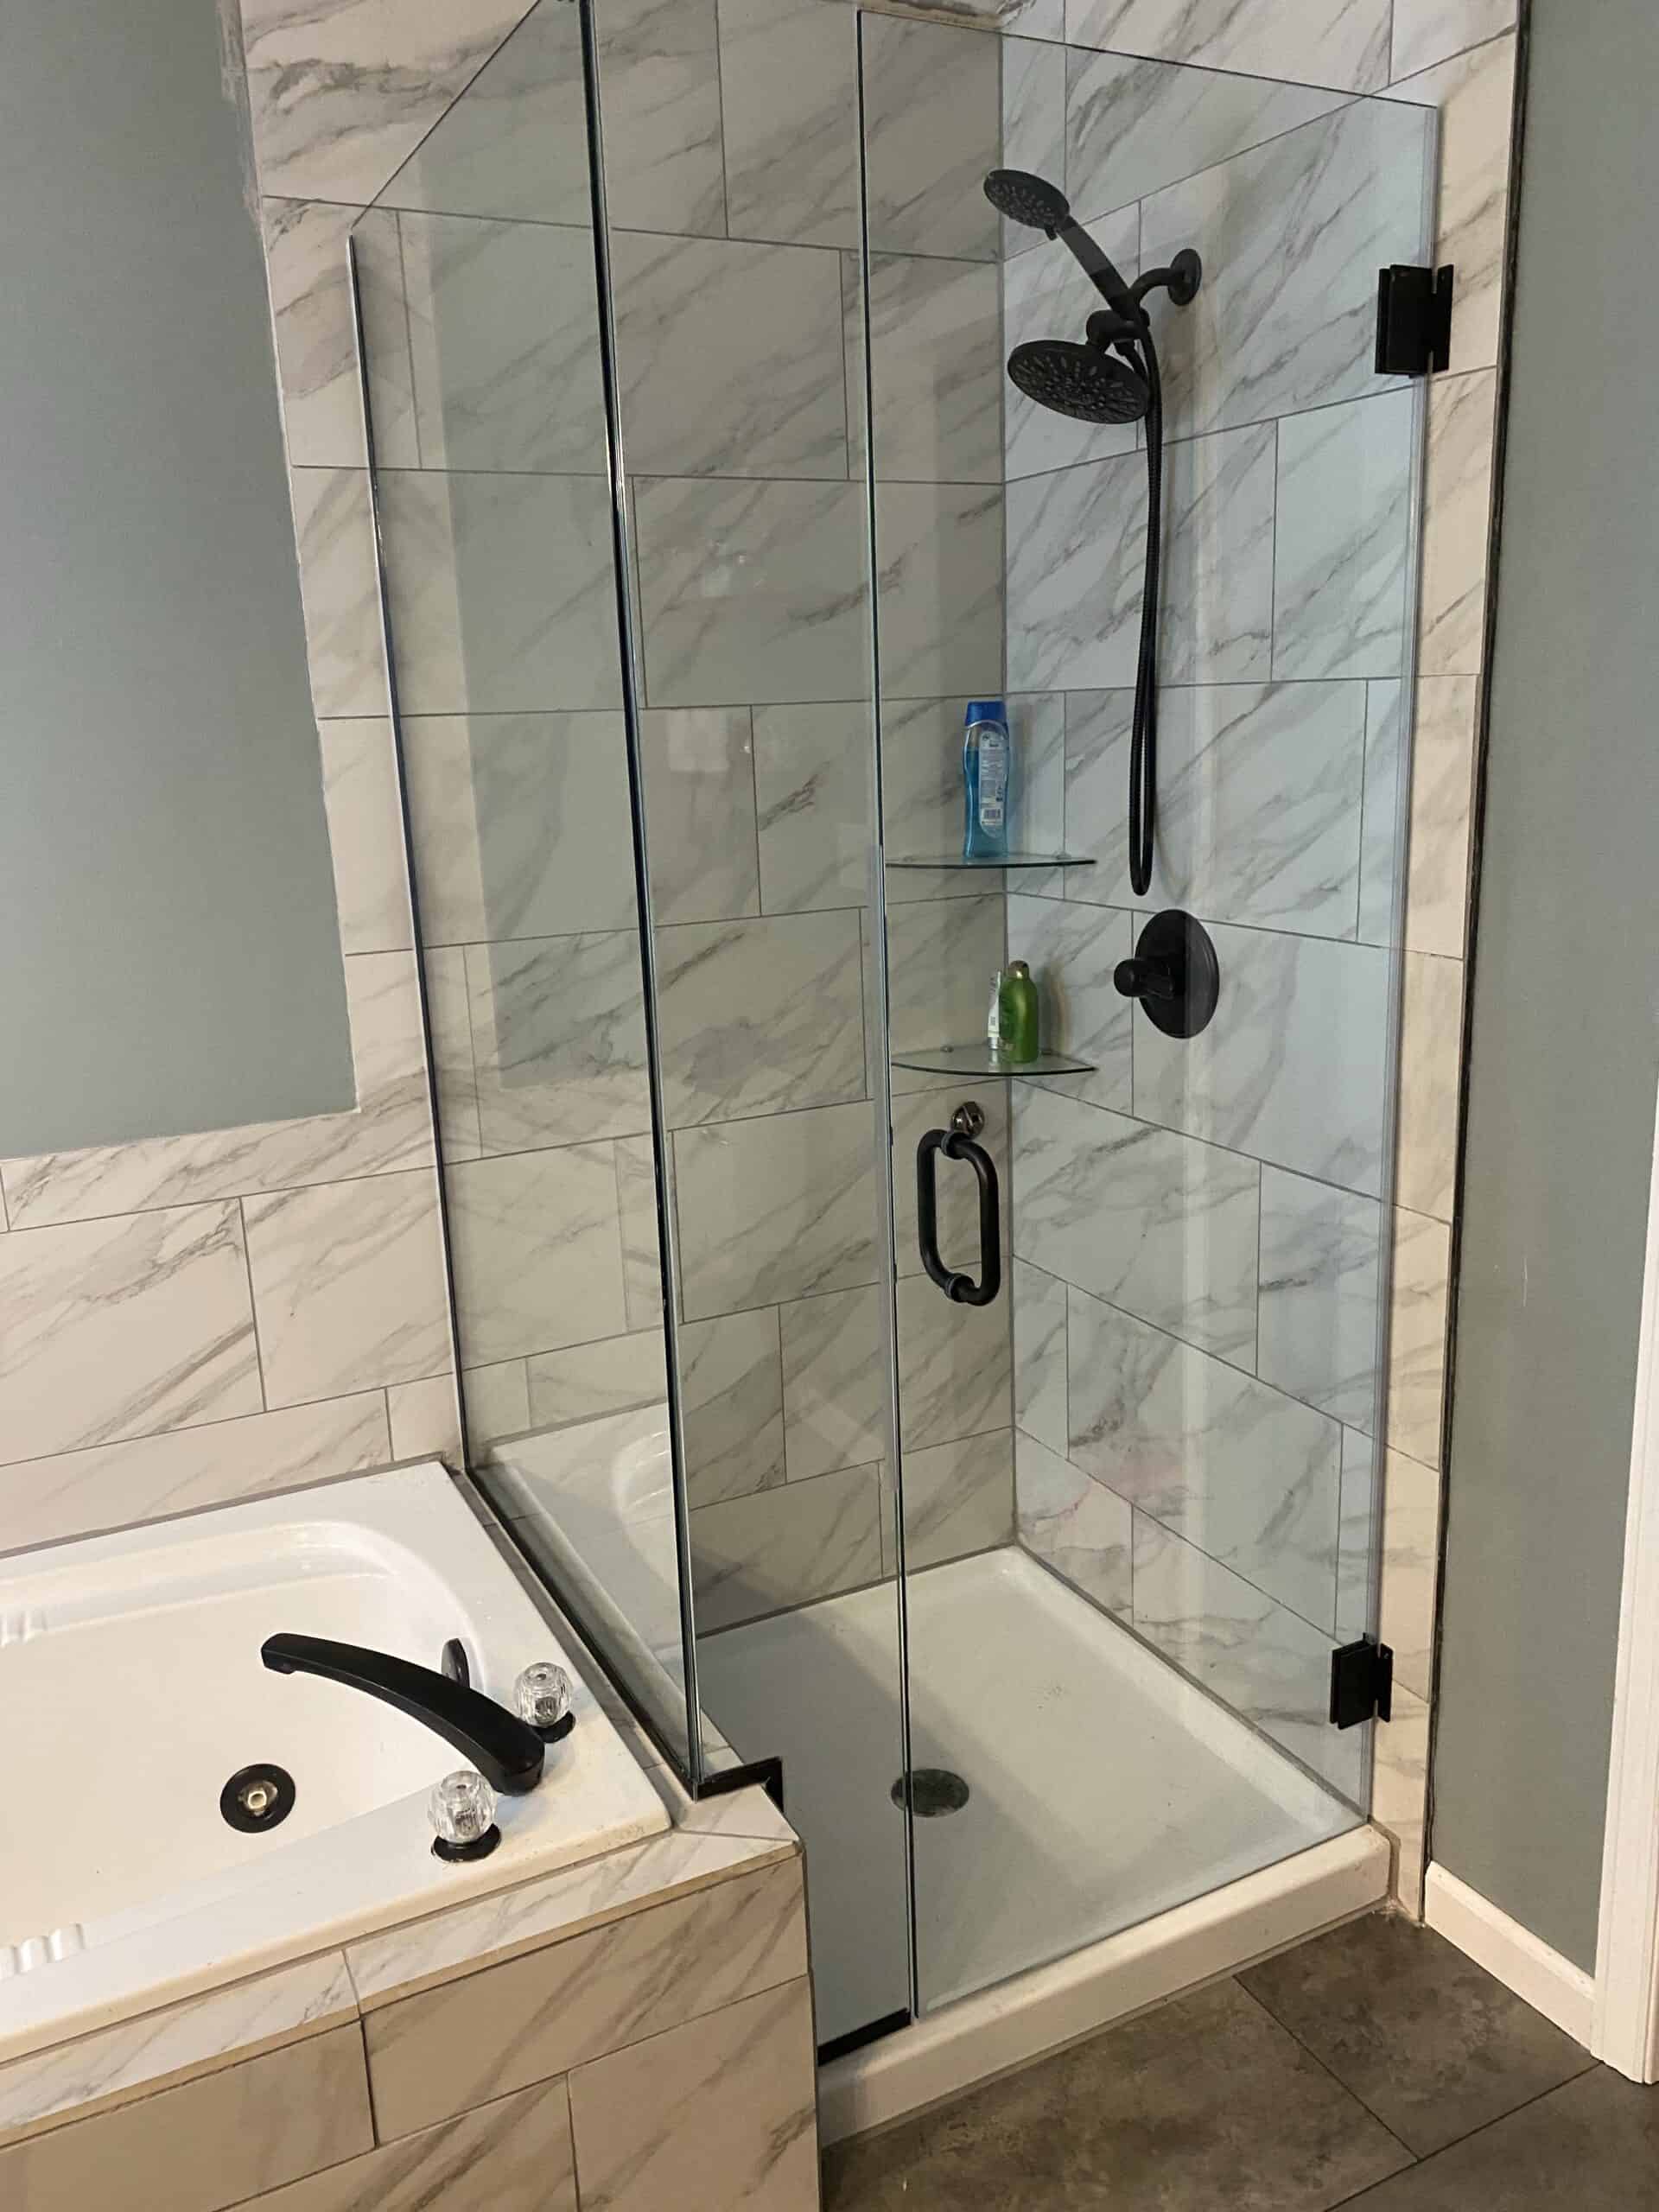 Simple ways to Install a Shower Cubicle on Your Own